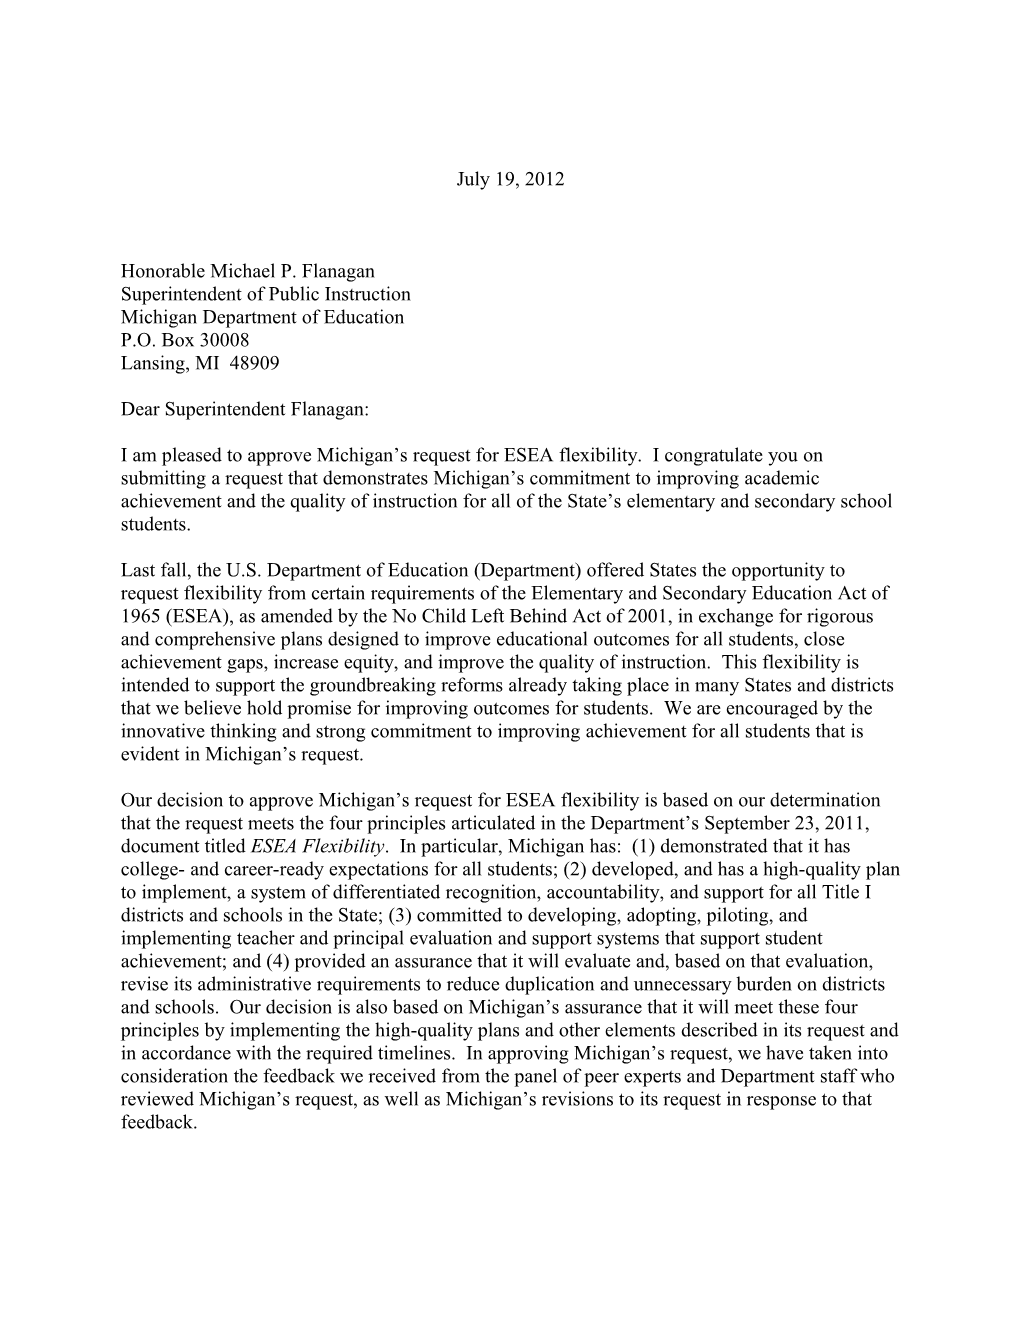 Michigan: ESEA Flexibility Requests, Secretary's Approval Letter July 19, 2012 (MS Word)